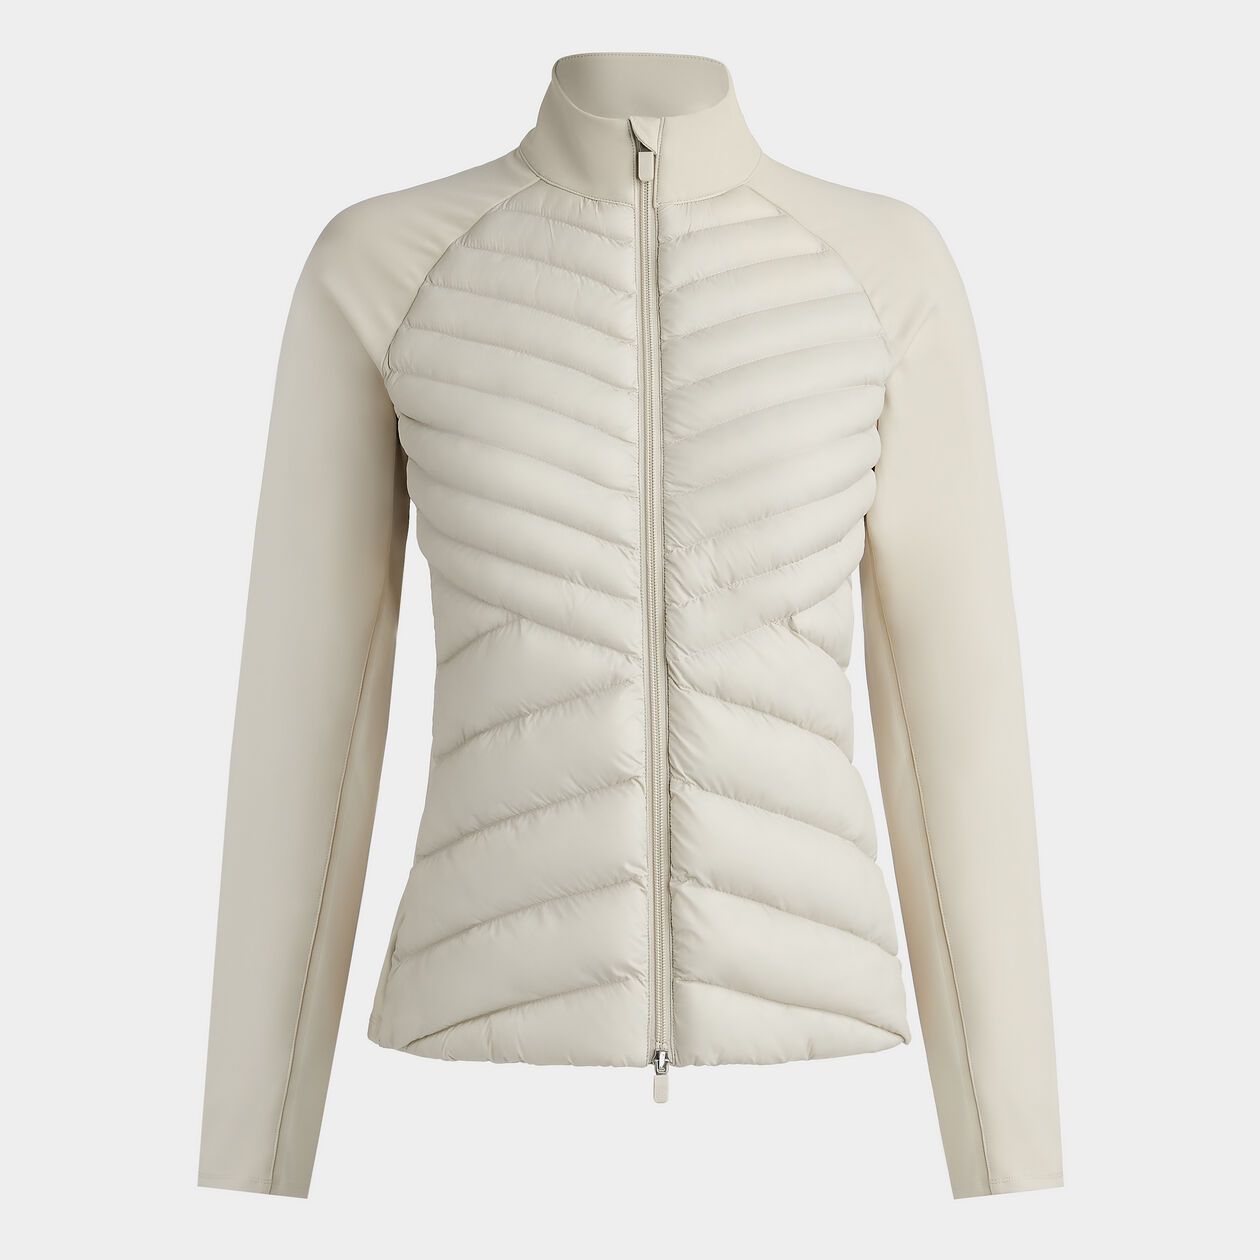 HYBRID QUILTED TECH INTERLOCK JACKET | WOMEN'S JACKETS & VESTS | G/FORE | G/FORE | GFORE.com